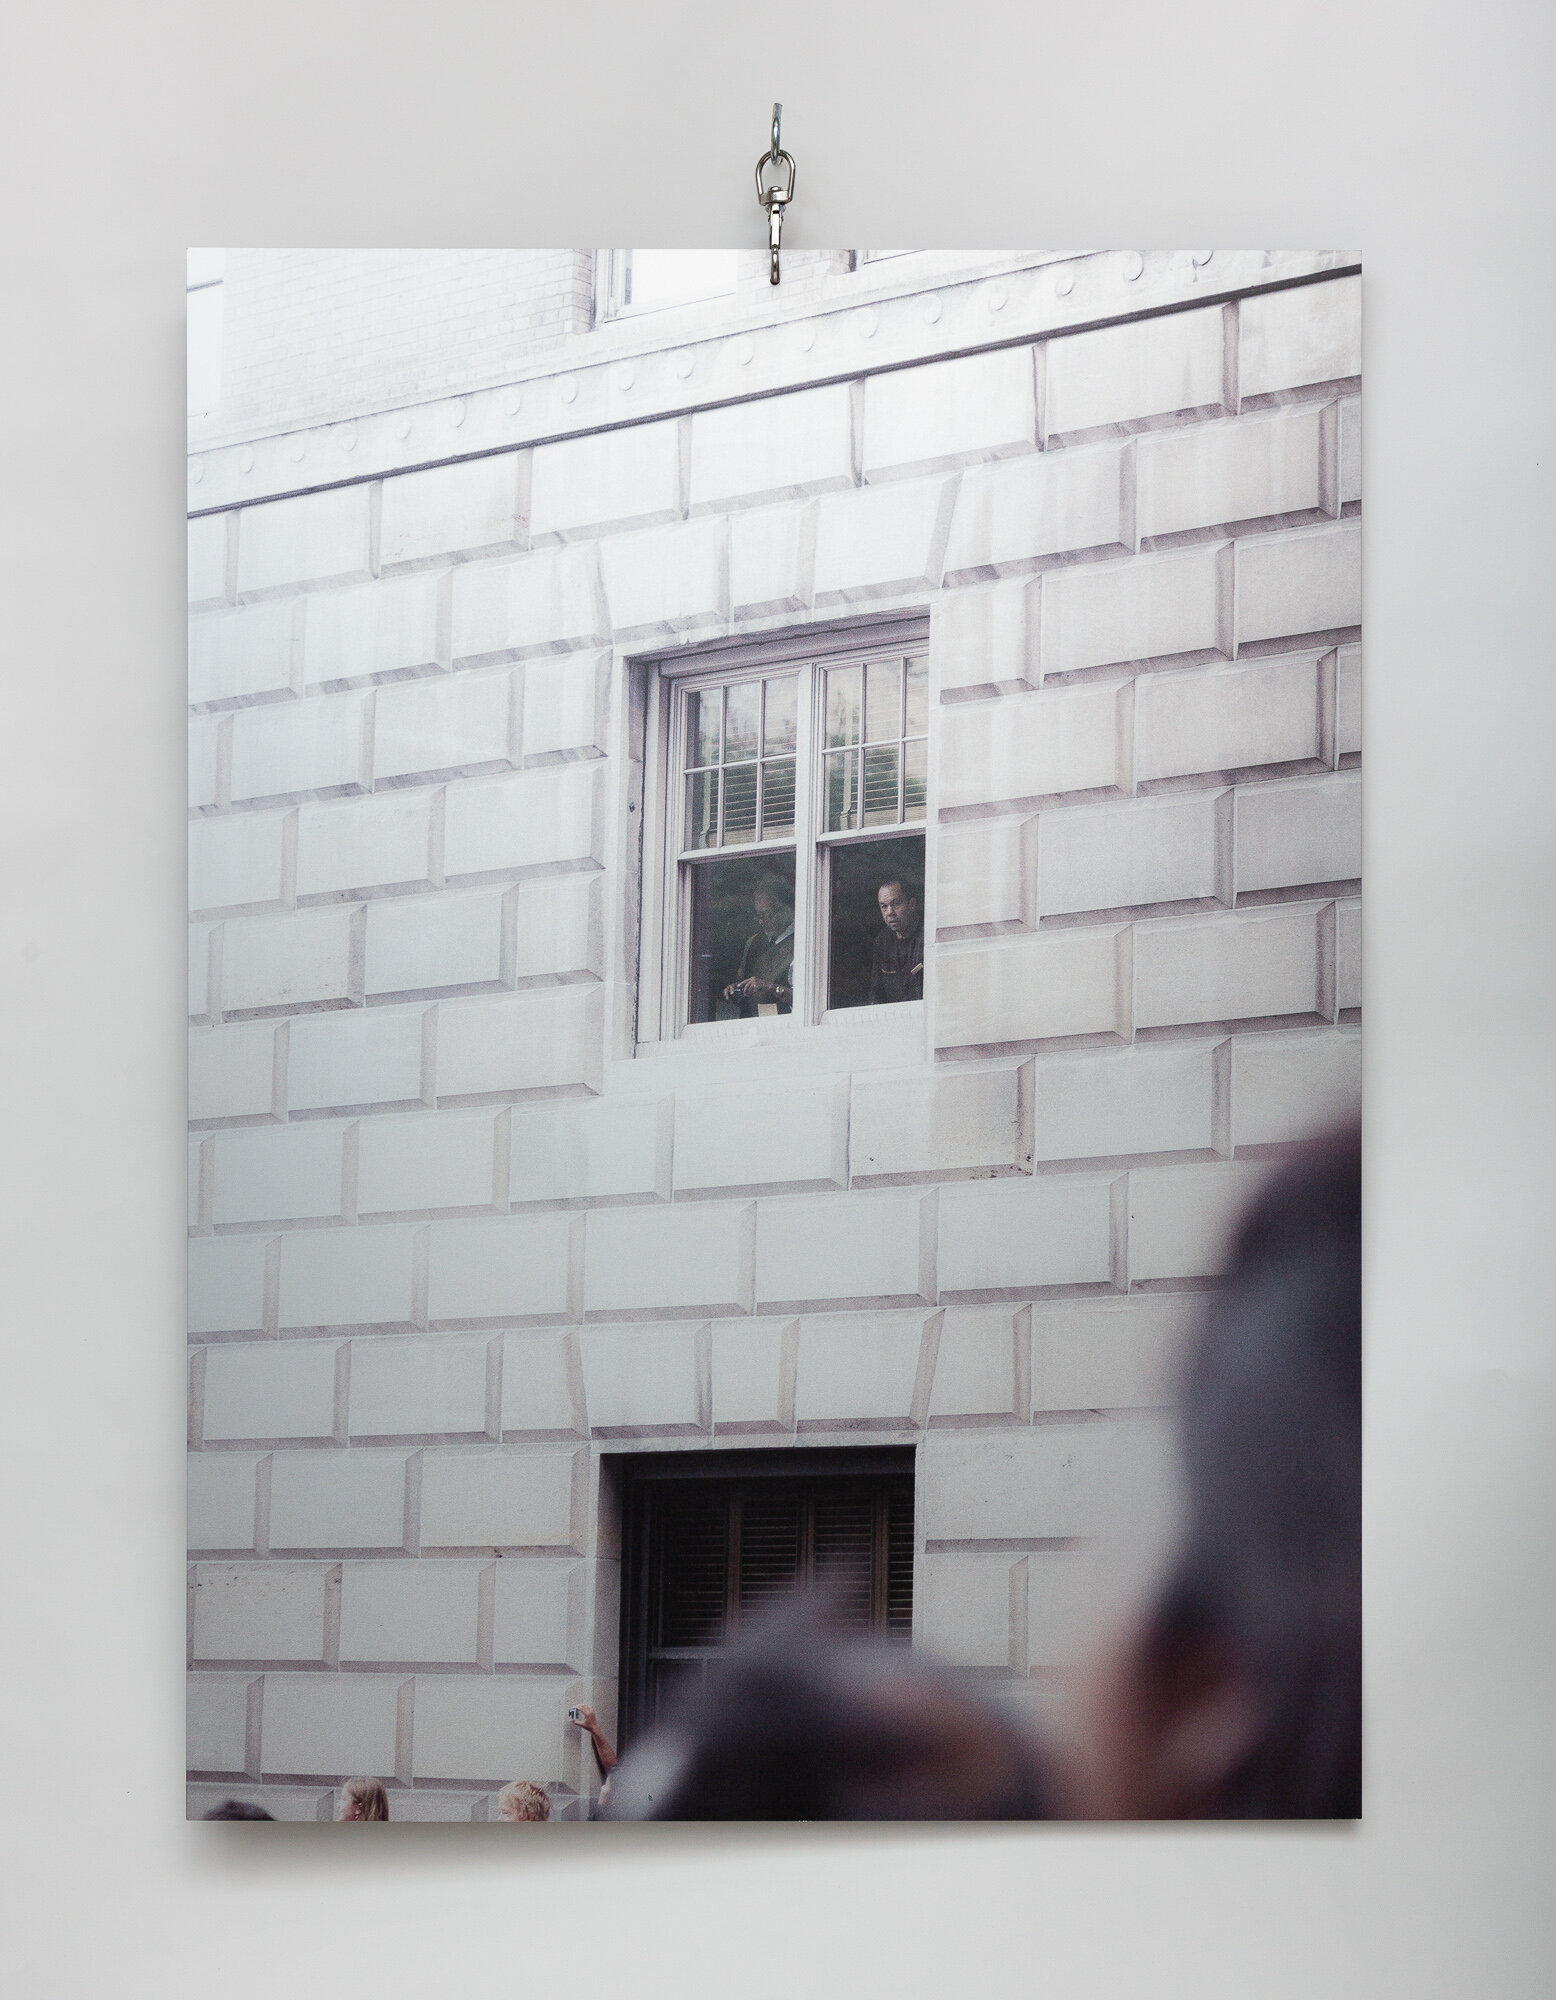   Central Park South (Panel 2, Side A) , 2015/19, Double-sided print on aluminum, 40 x 30 inches 